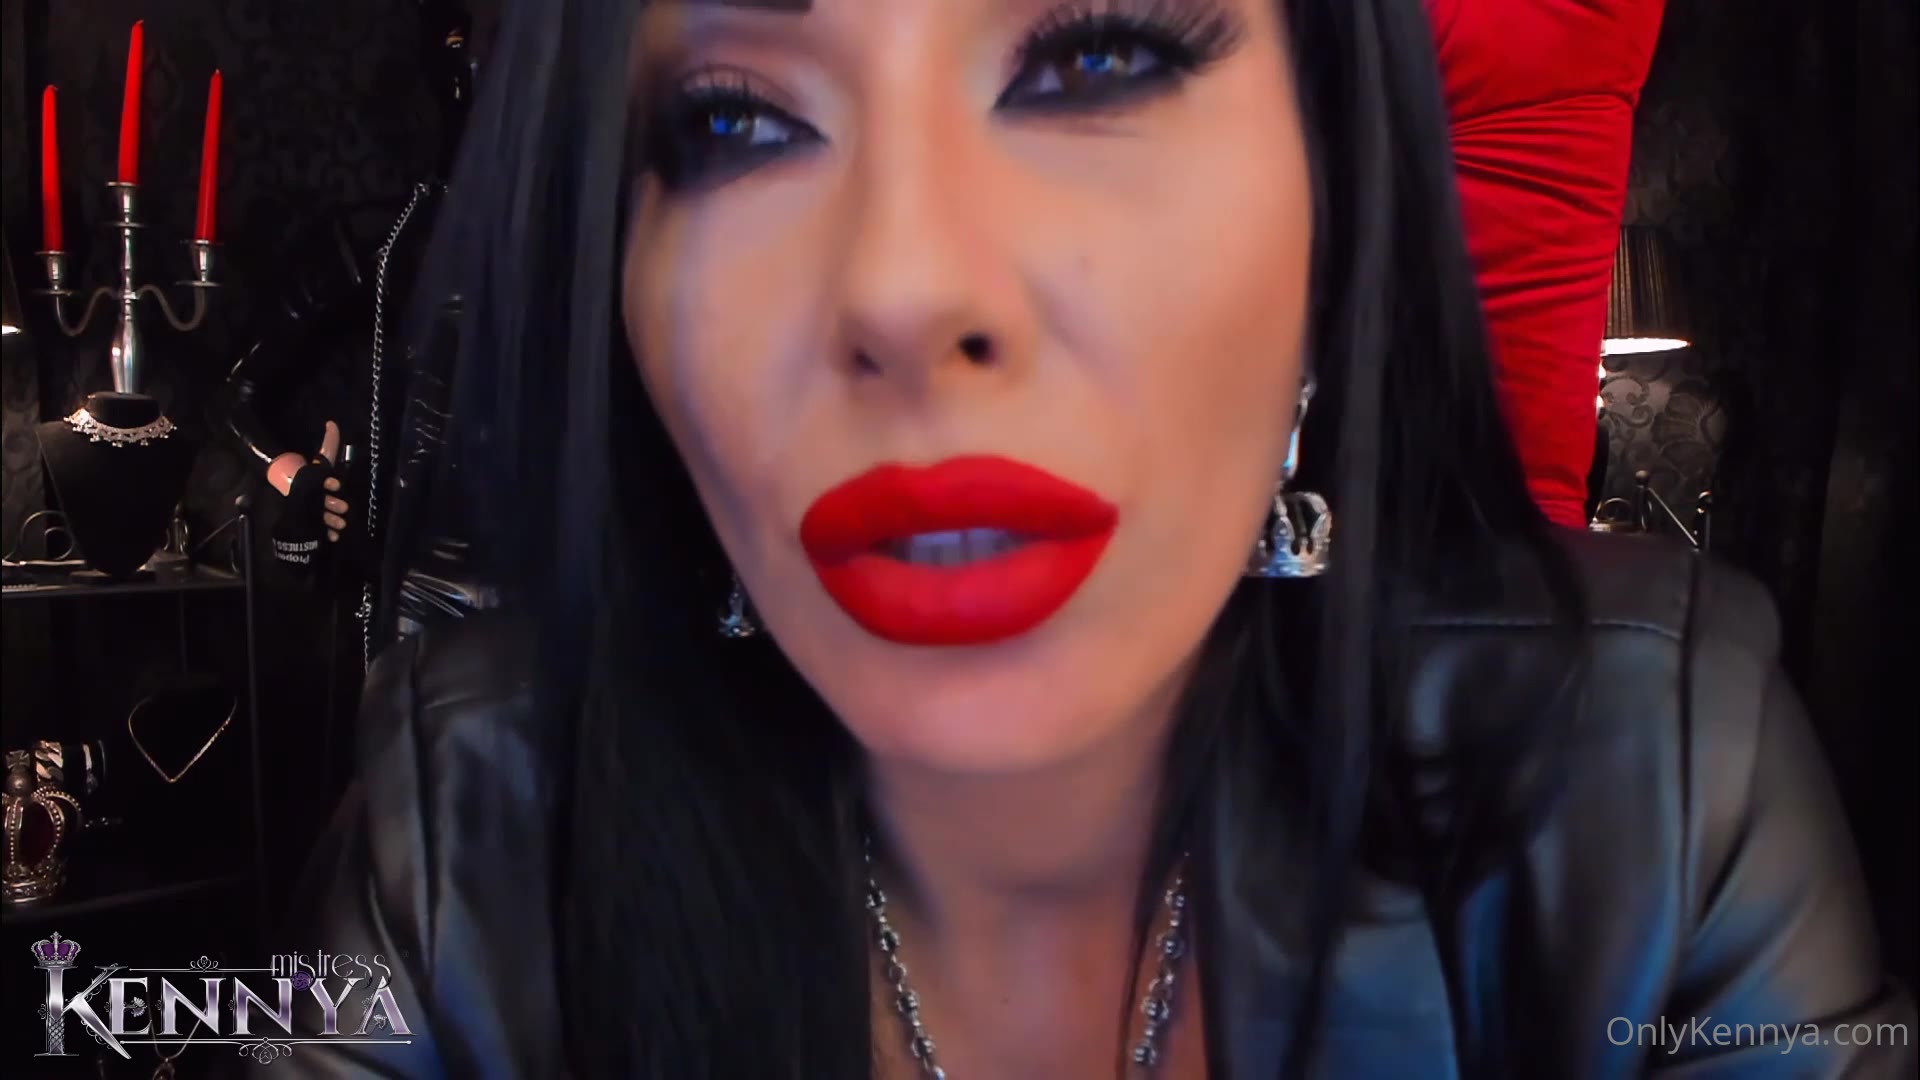 Mistress Kennya - Cuckolding with red lips and nails POV